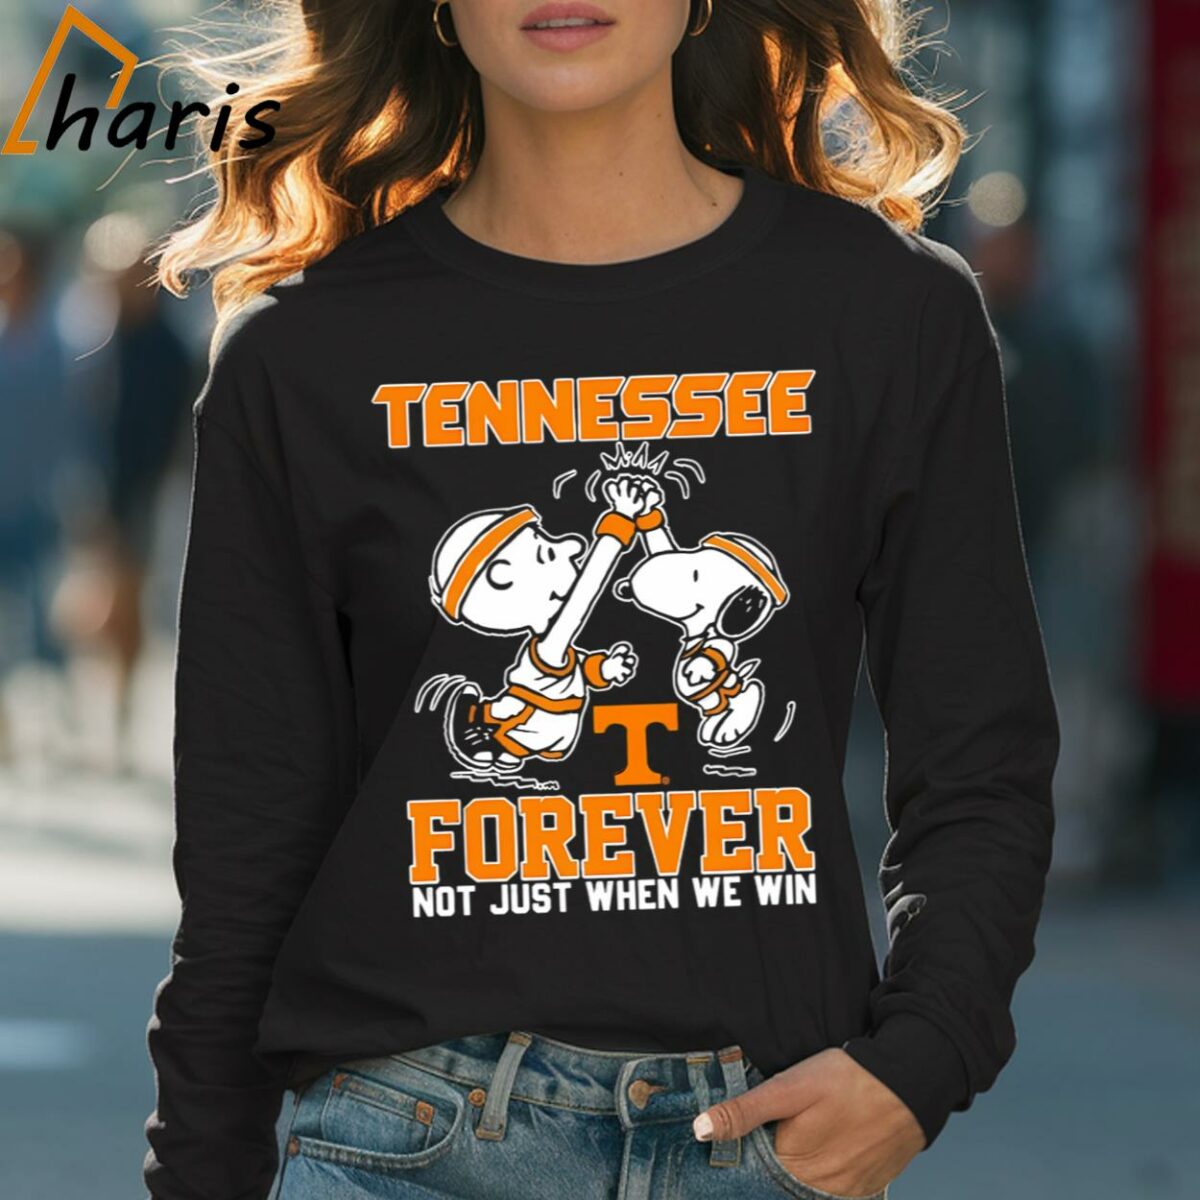 Tennessee Volunteers Forever Not Just When We Win Snoopy Charlie Brown High Five Shirt 4 Long sleeve shirt